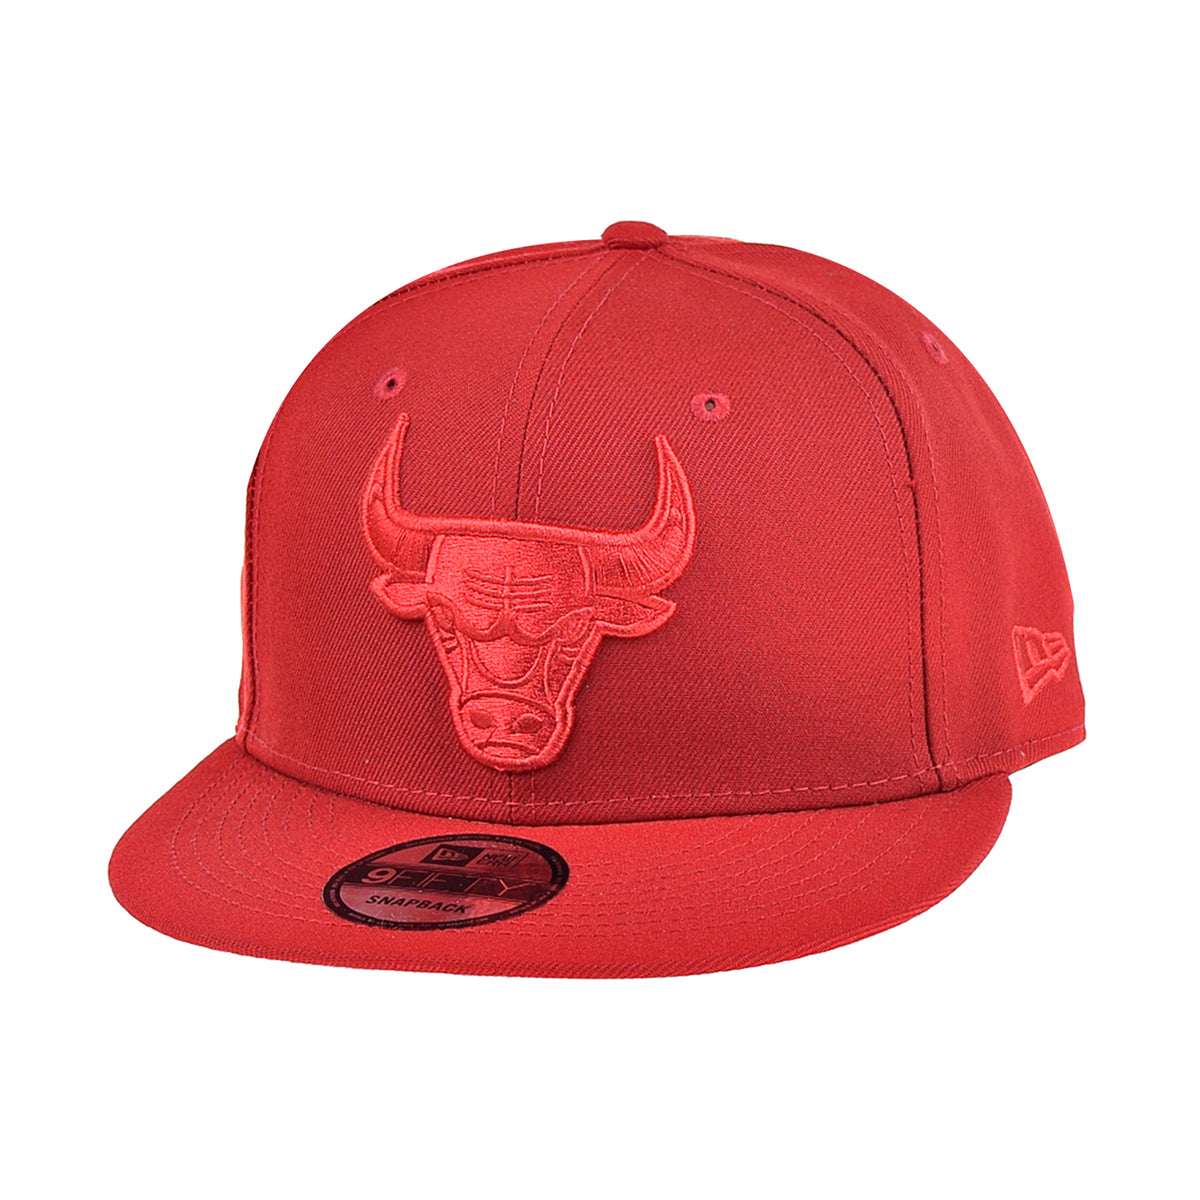 Youth Chicago Bulls Red Foam Front Trucker Snapback Hat